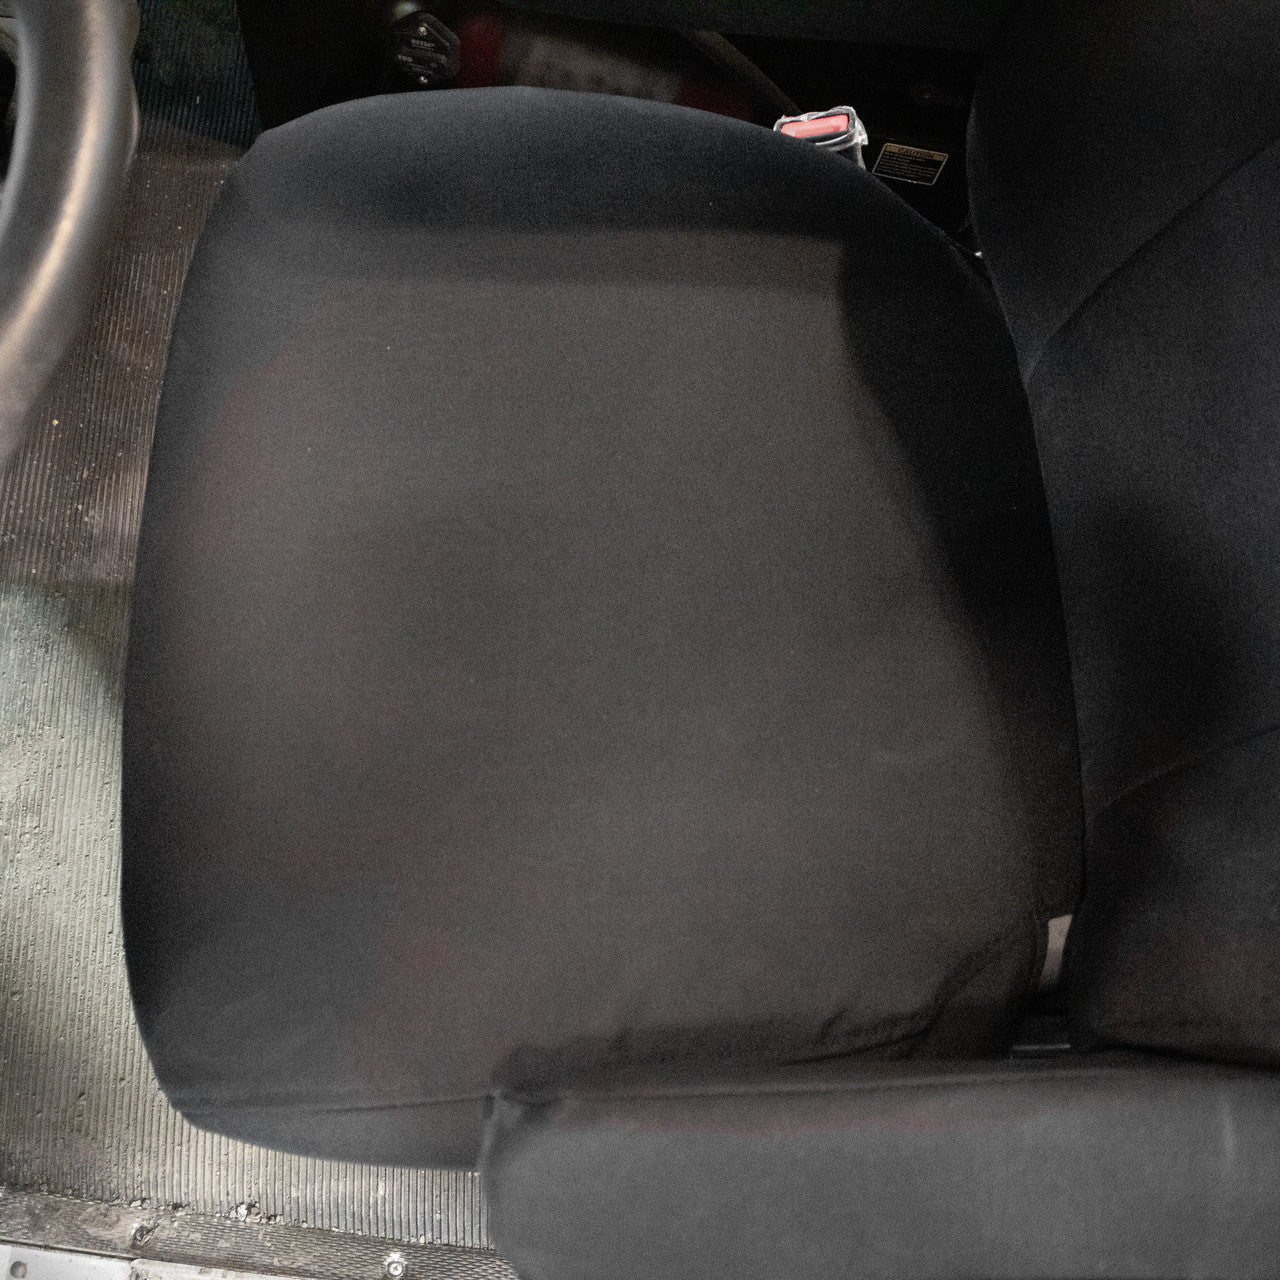 Black TigerTough Seat Covers for National Seat